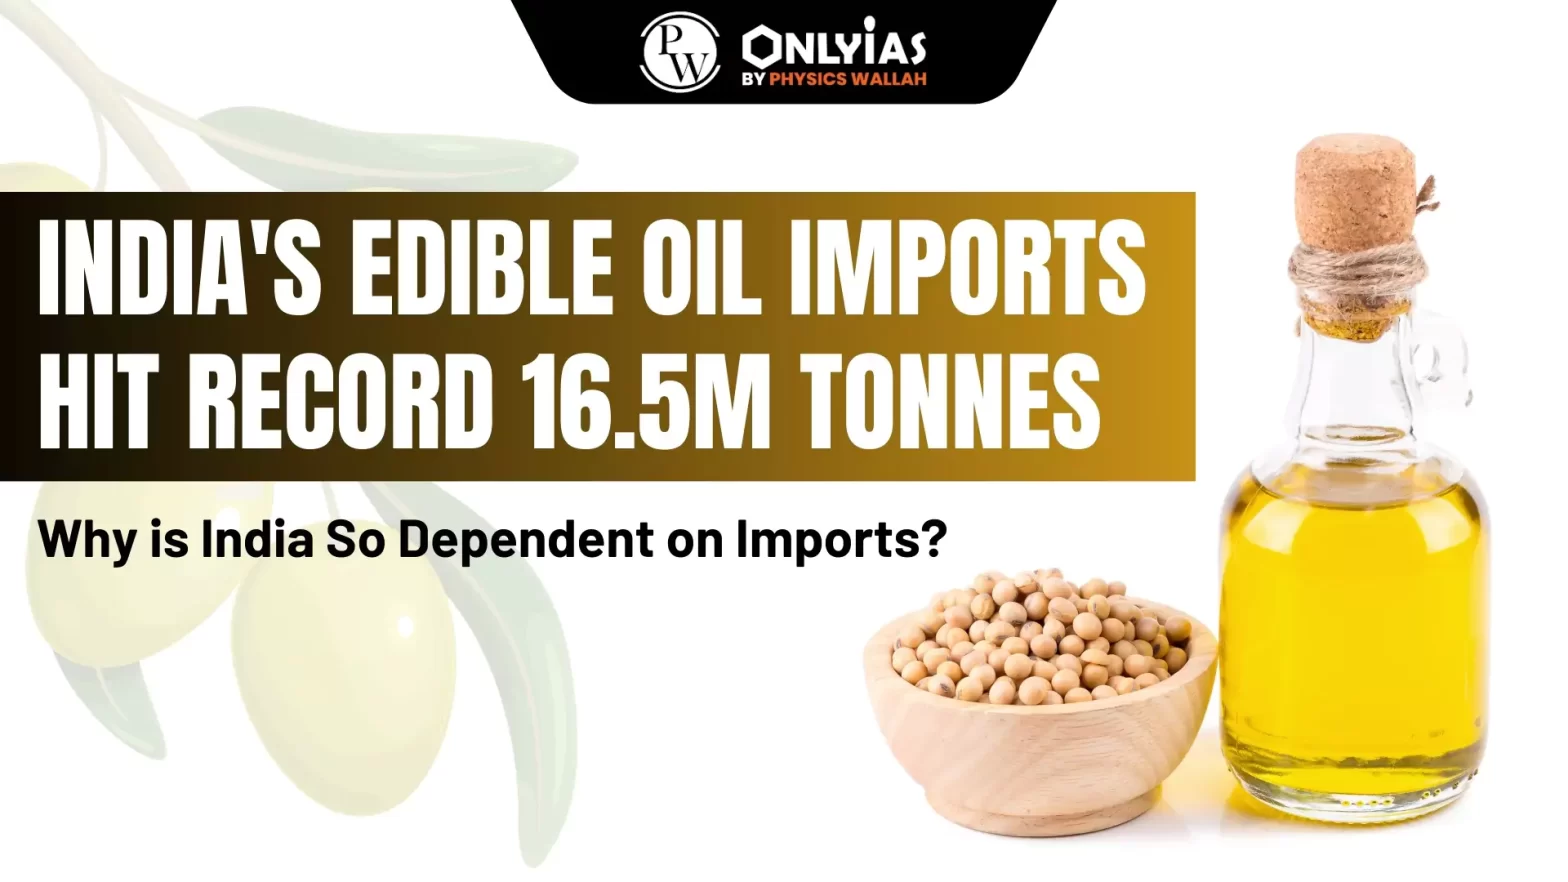 India’s Edible Oil Imports Hit Record 16.5M Tonnes: Why is India So Dependent on Imports?